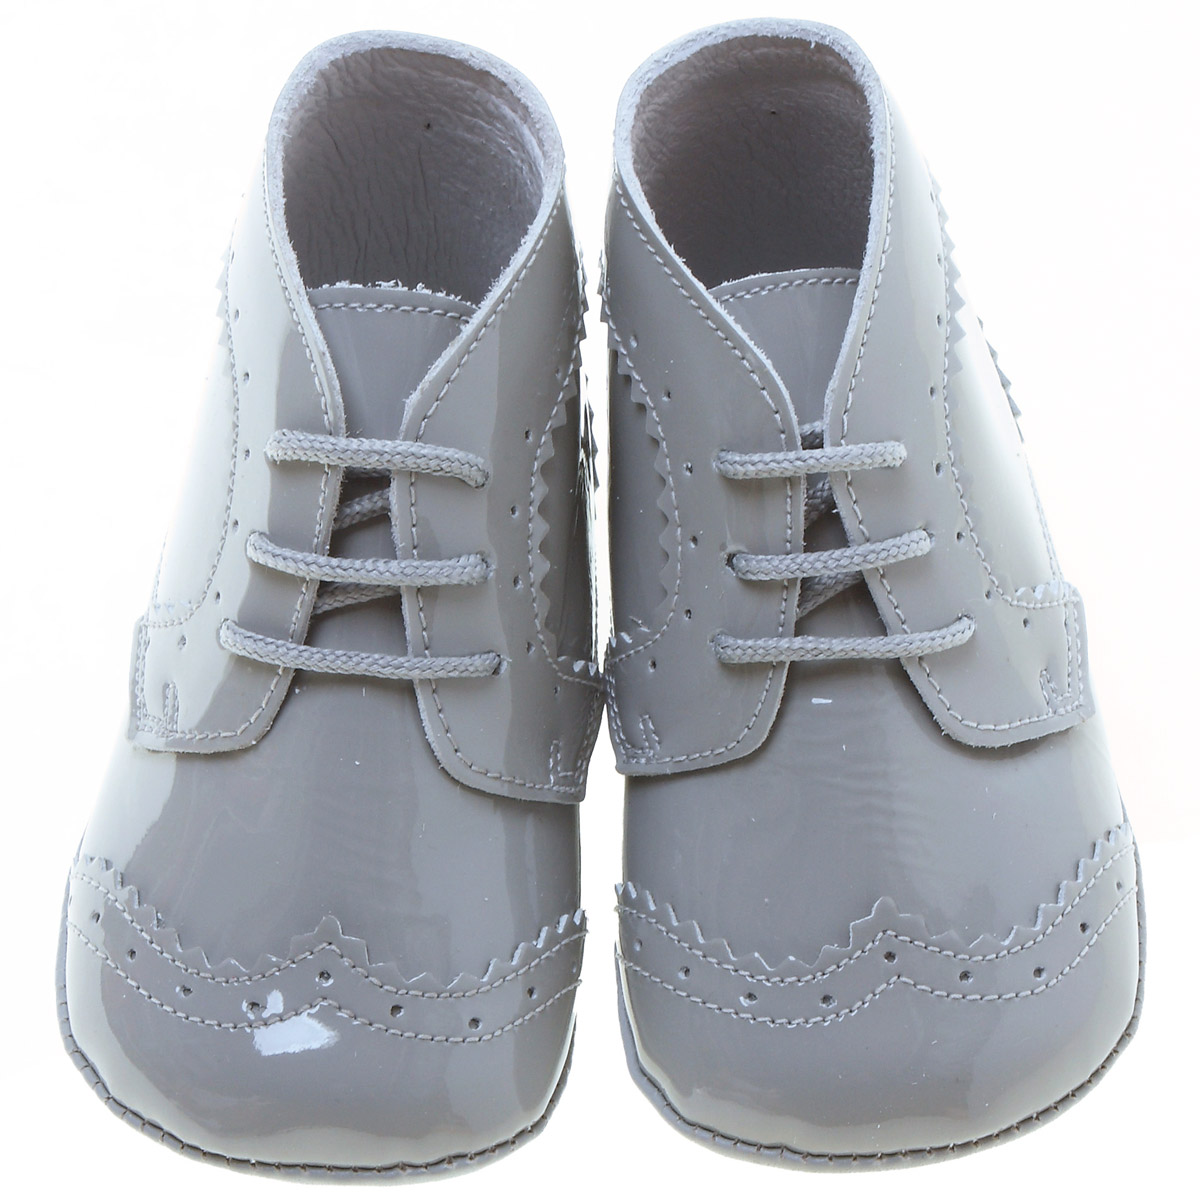 Baby Boys Light Grey Or Ice Grey Shoes In Patent Leather